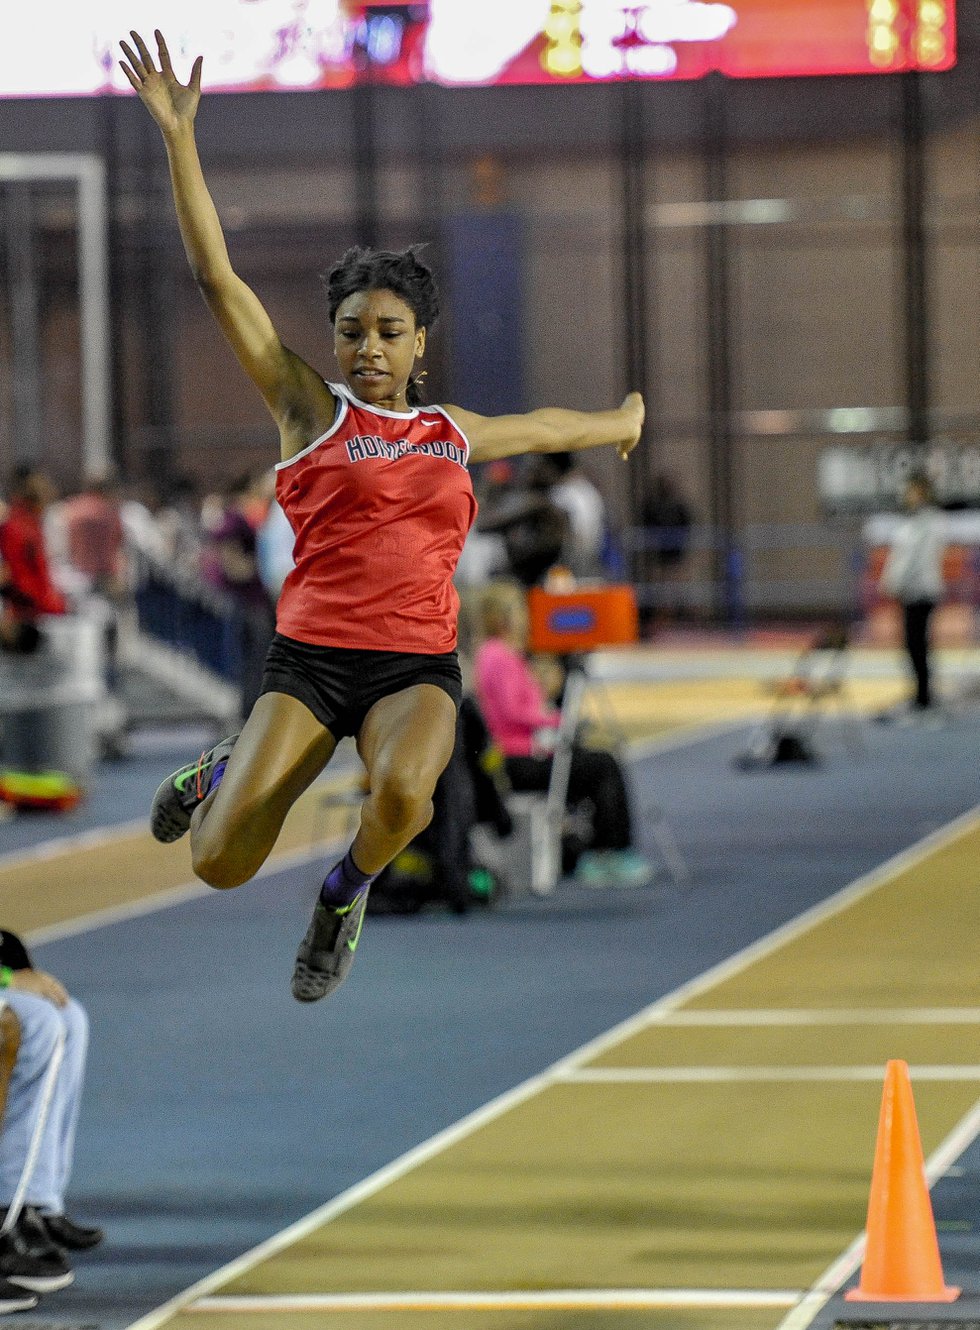 Homewood Track and Field